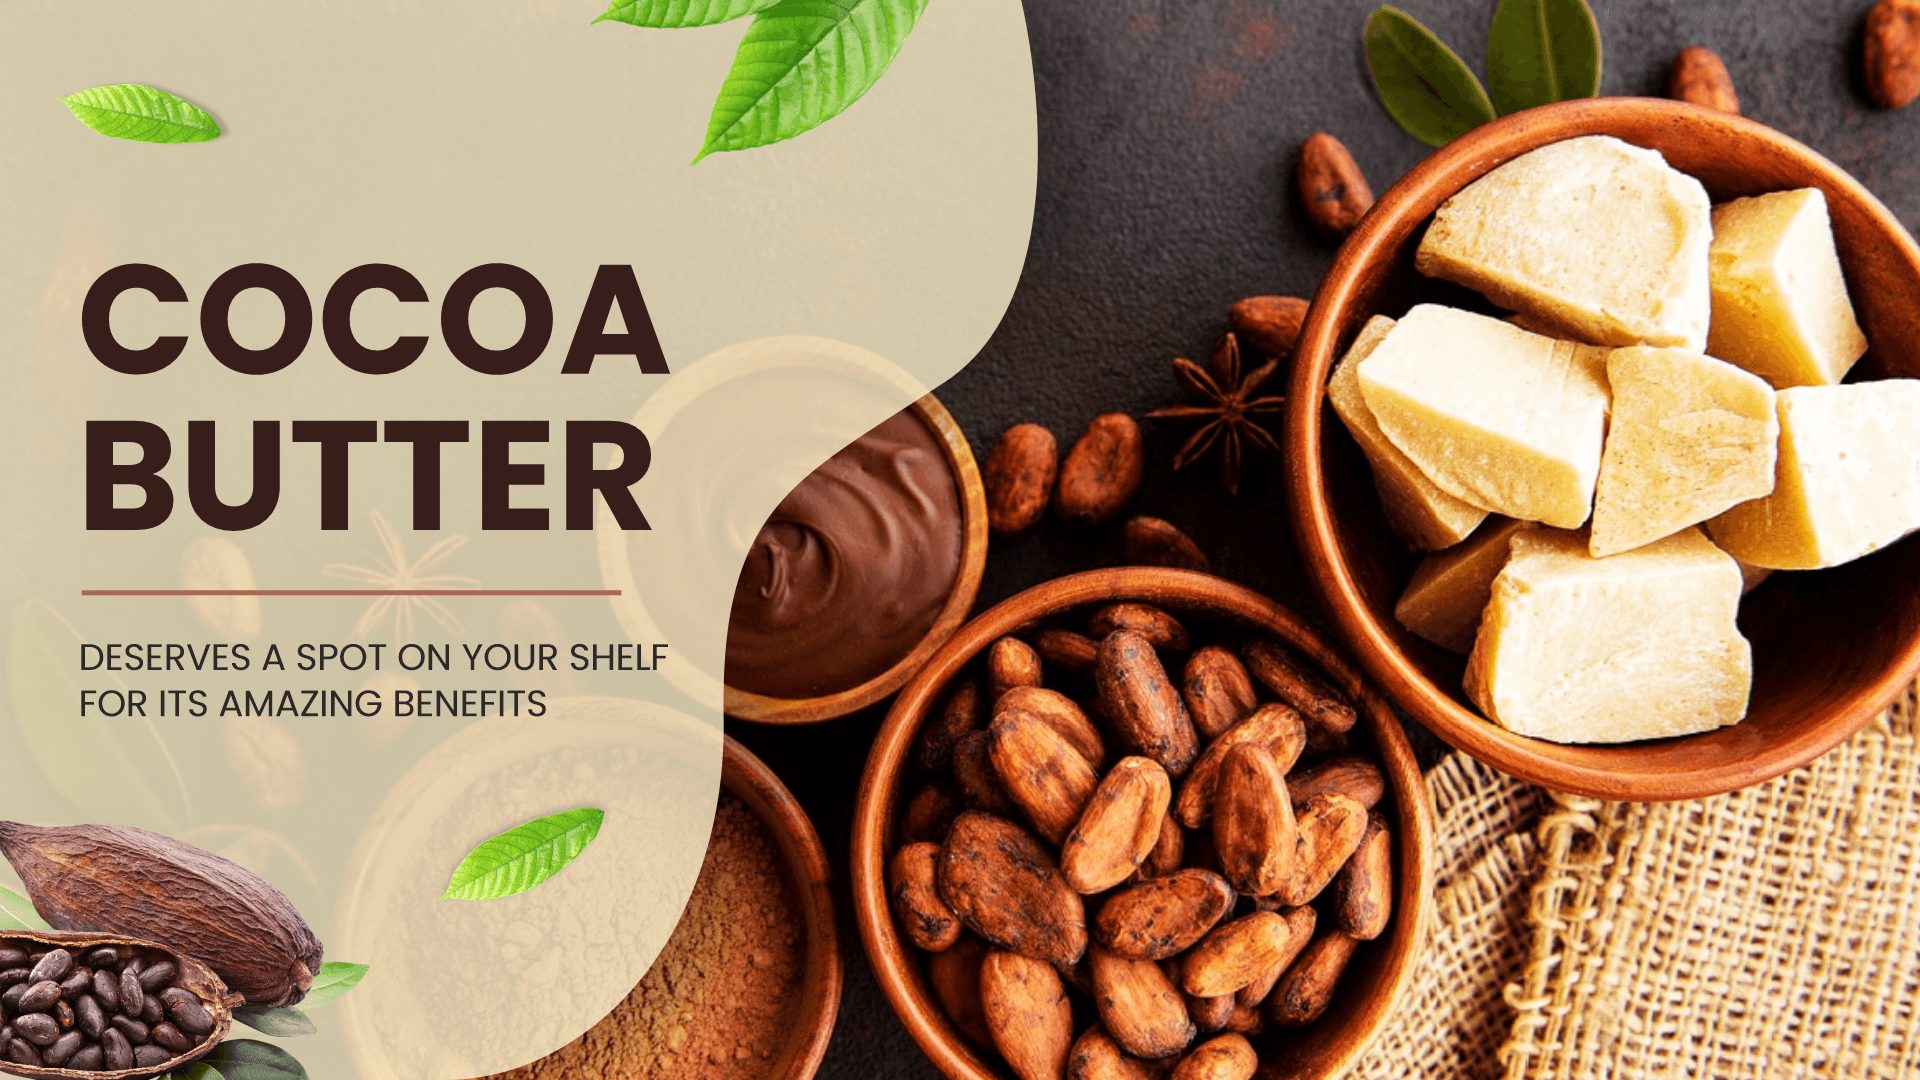 COCOA BUTTER DESERVES A SPOT ON YOUR SHELF FOR ITS AMAZING BENEFITS - aaranyaa skincare